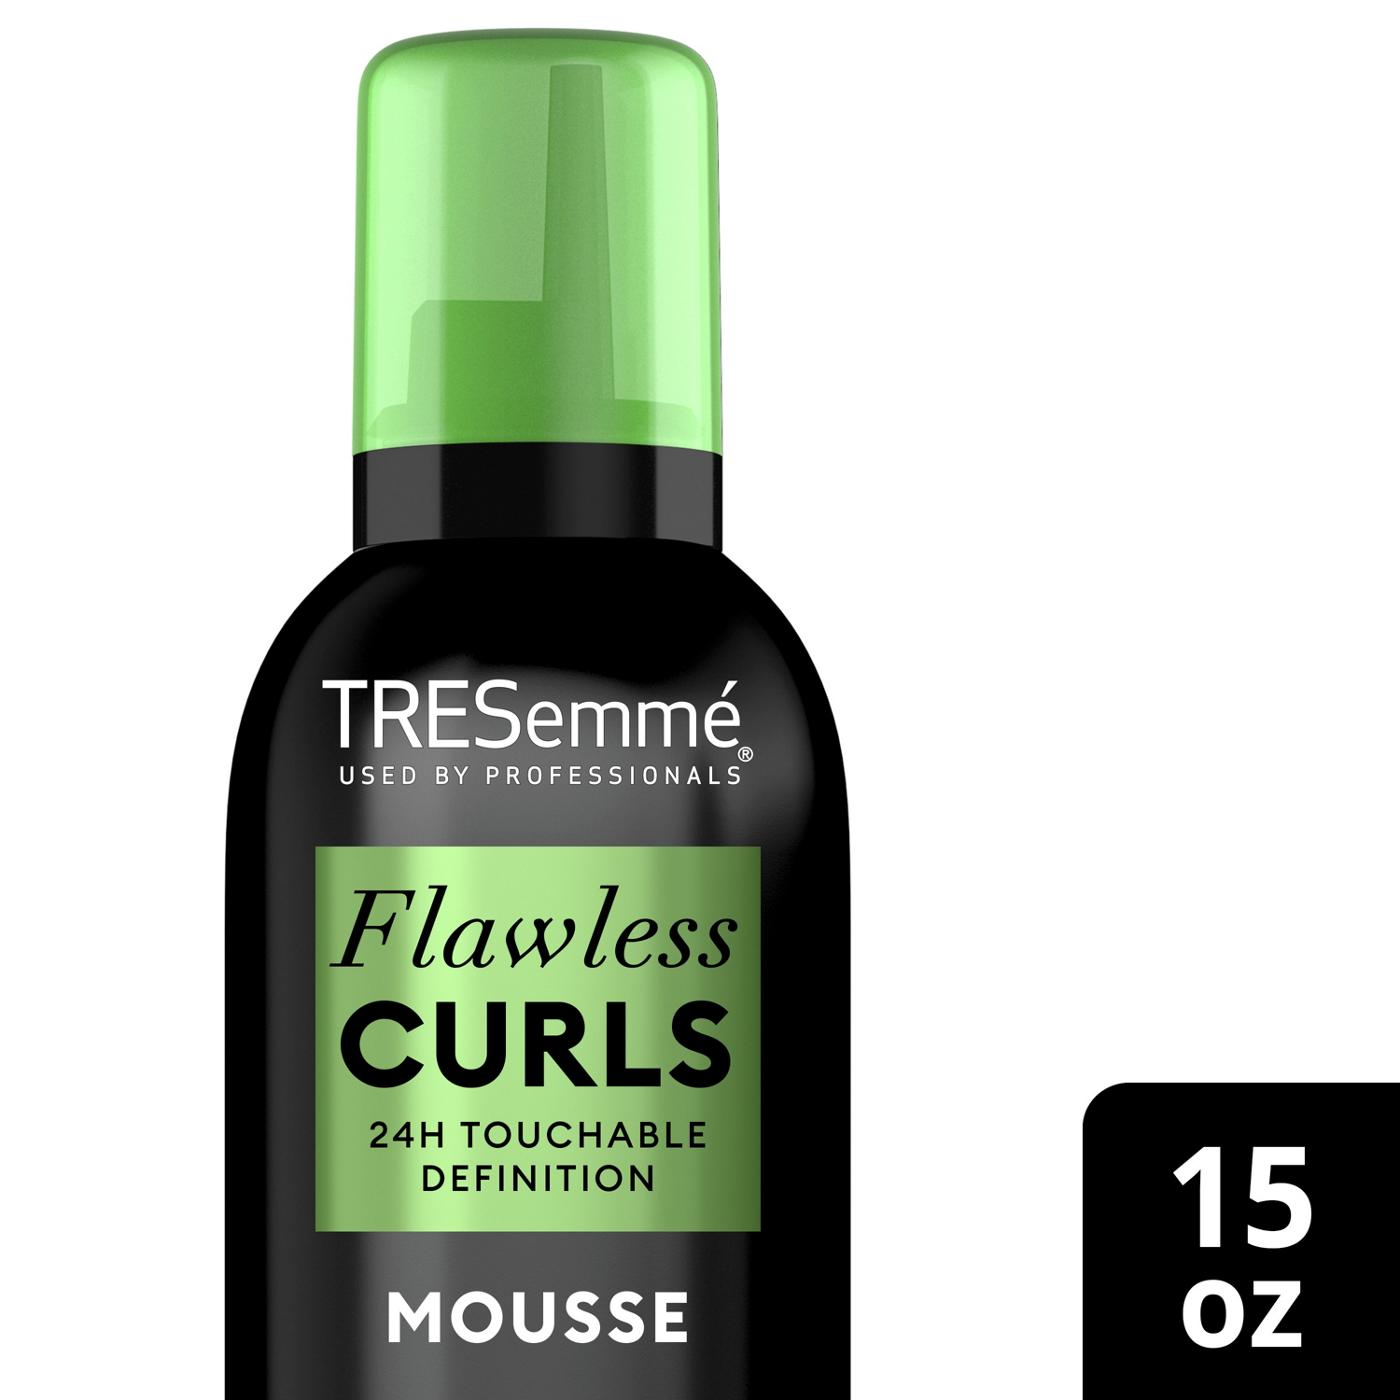 TRESemmé Flawless Curls Extra Hold Mousse ; image 2 of 4